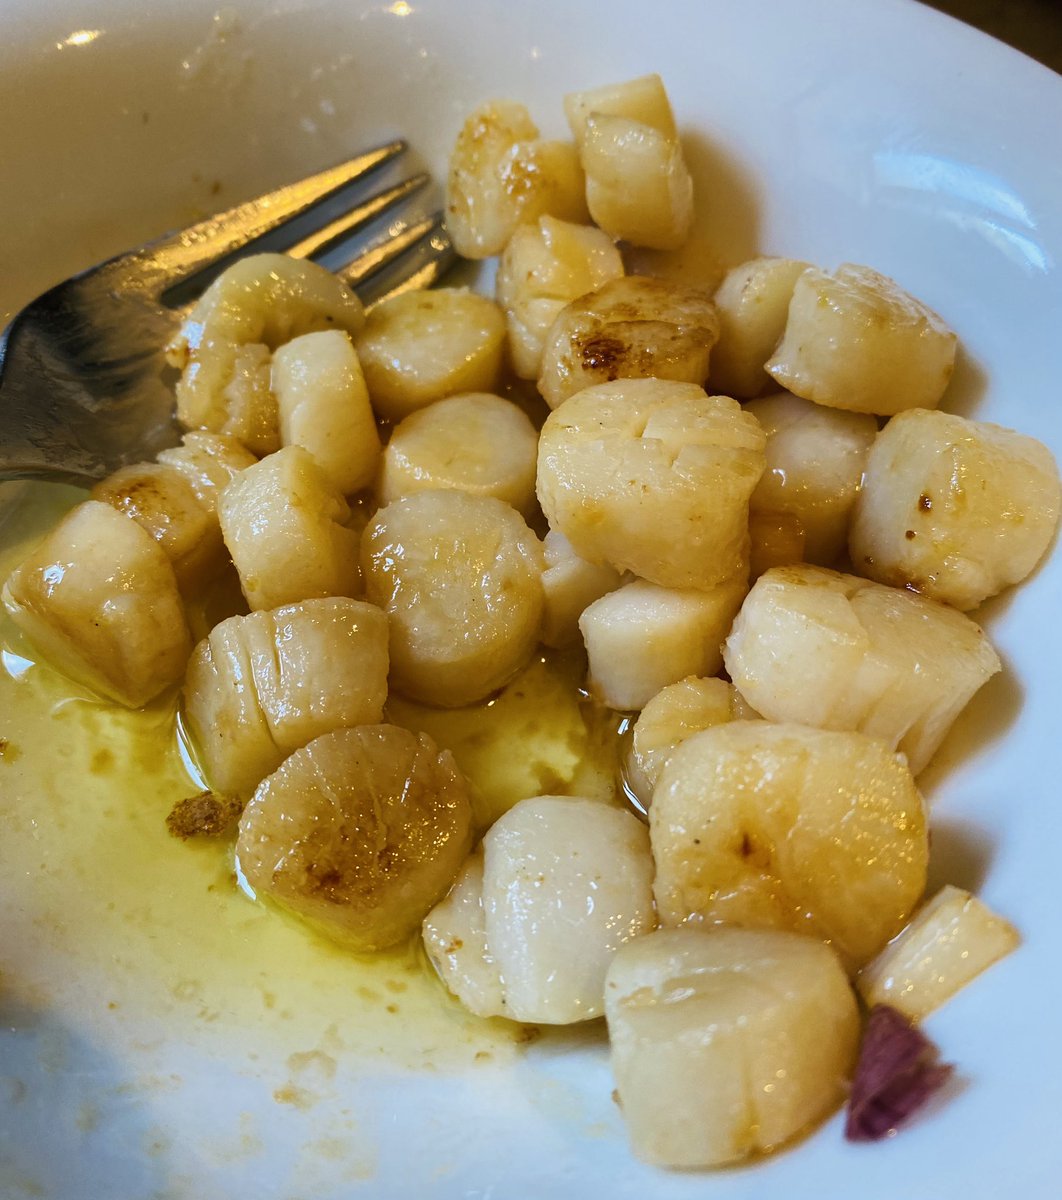 Baby scallops with lots of butter and lemon juice. 
#Foodie #foodphotography